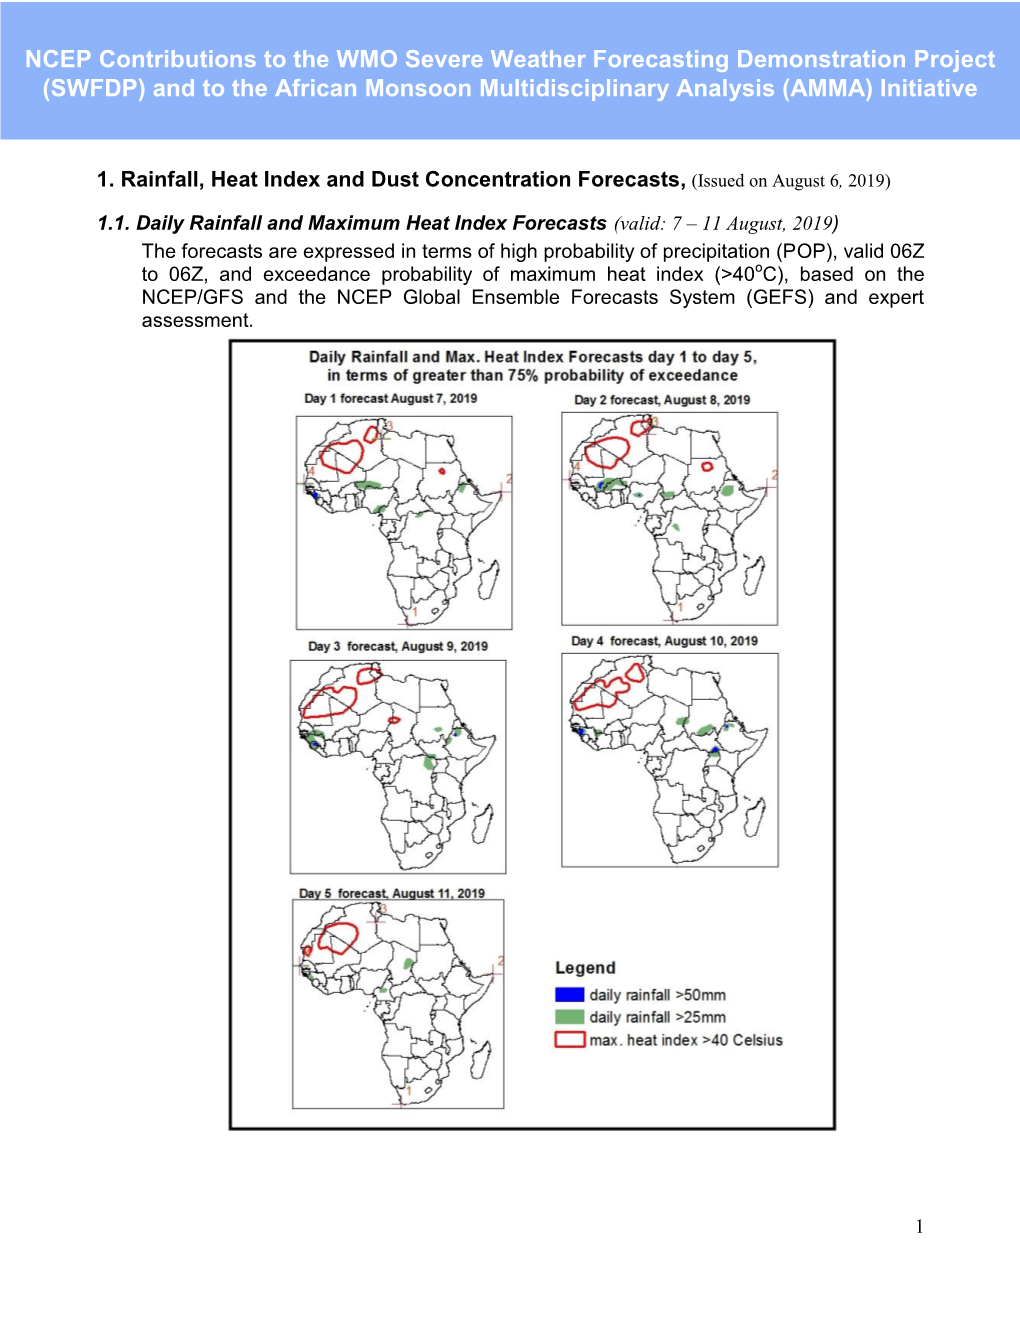 NCEP Contributions to the WMO Severe Weather Forecasting Demonstration Project (SWFDP) and to the African Monsoon Multidisciplinary Analysis (AMMA) Initiative